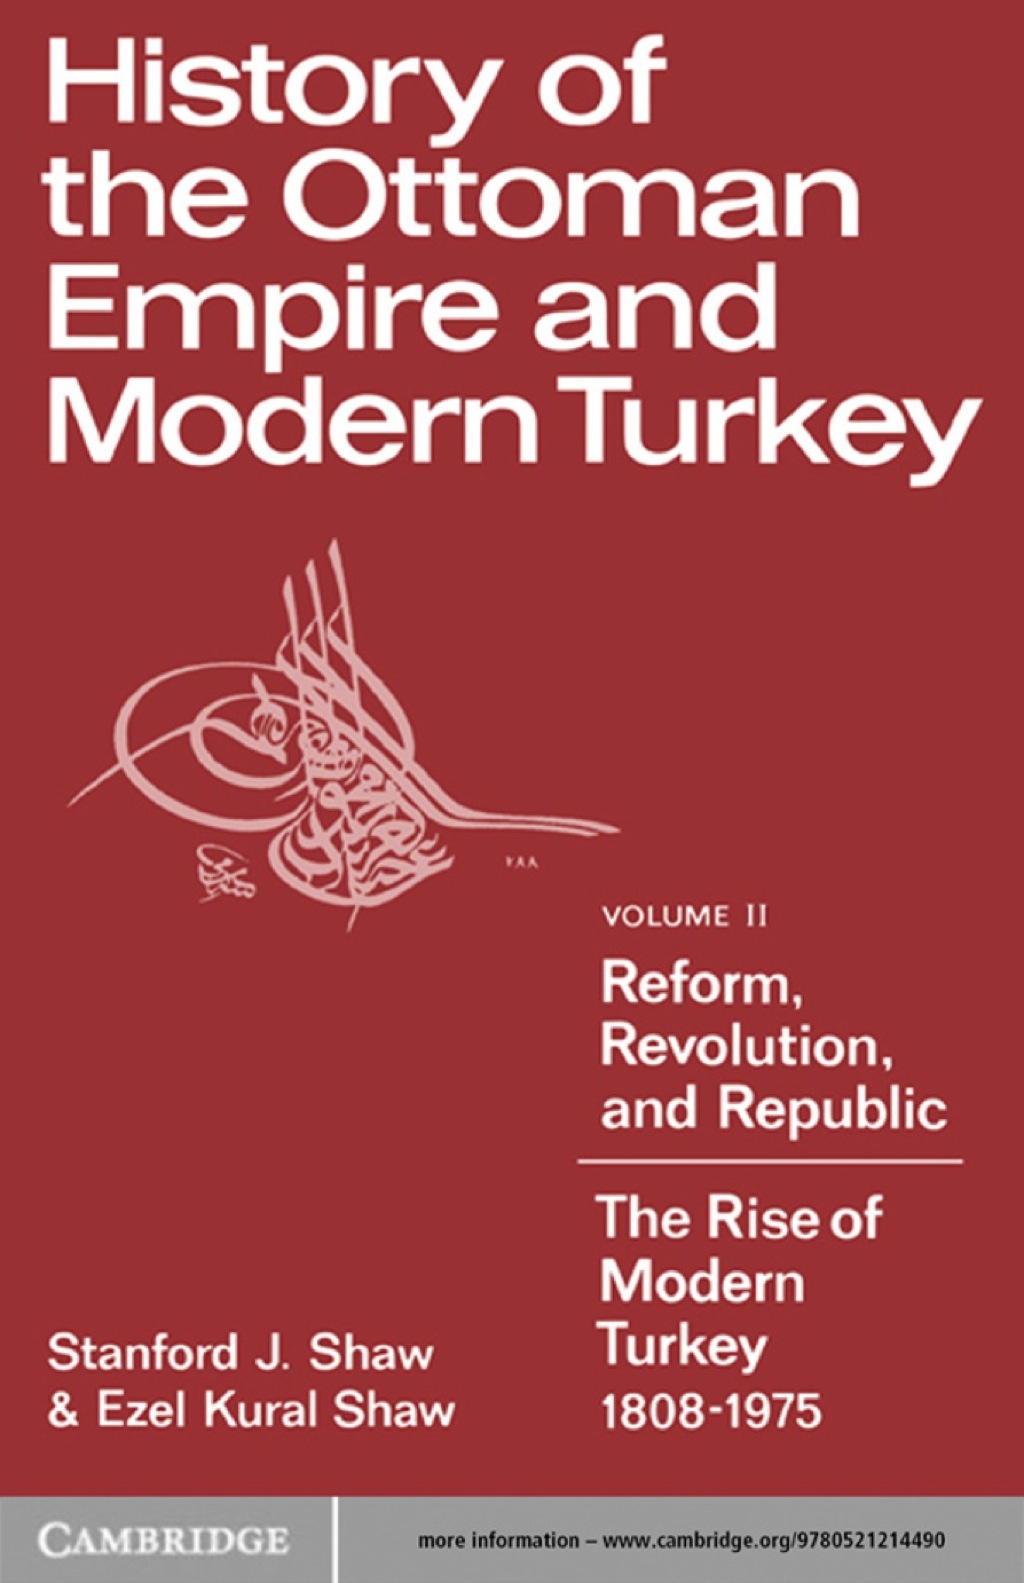 History of the Ottoman Empire and Modern Turkey: Volume 2  Reform  Revolution  and Republic: The Rise of Modern Turkey 18 (eBook) - Stanford J. Shaw; Ezel Kural Shaw